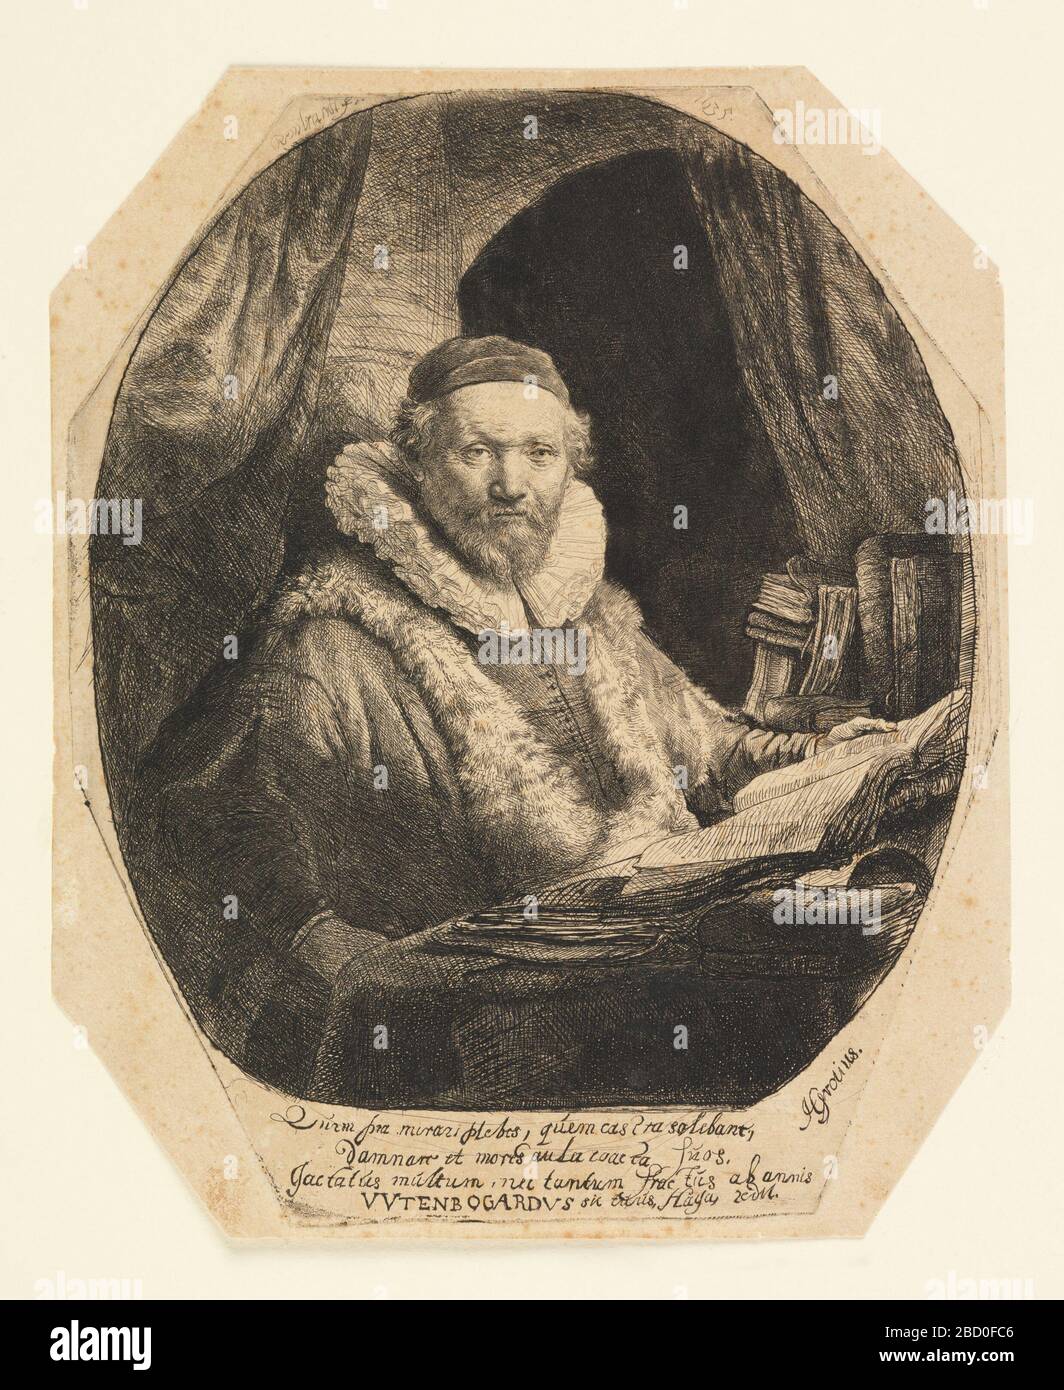 Jan Uytenbogaert 15571644 Preacher of the Remonstrants. Research in ProgressHalf-length portrait of the subject, turned toward the right, looking out at the spectator, head shown in three-quarter view. He is seated before a table on which are several books. His left hand supports an open volume. Jan Uytenbogaert 15571644 Preacher of the Remonstrants Stock Photo